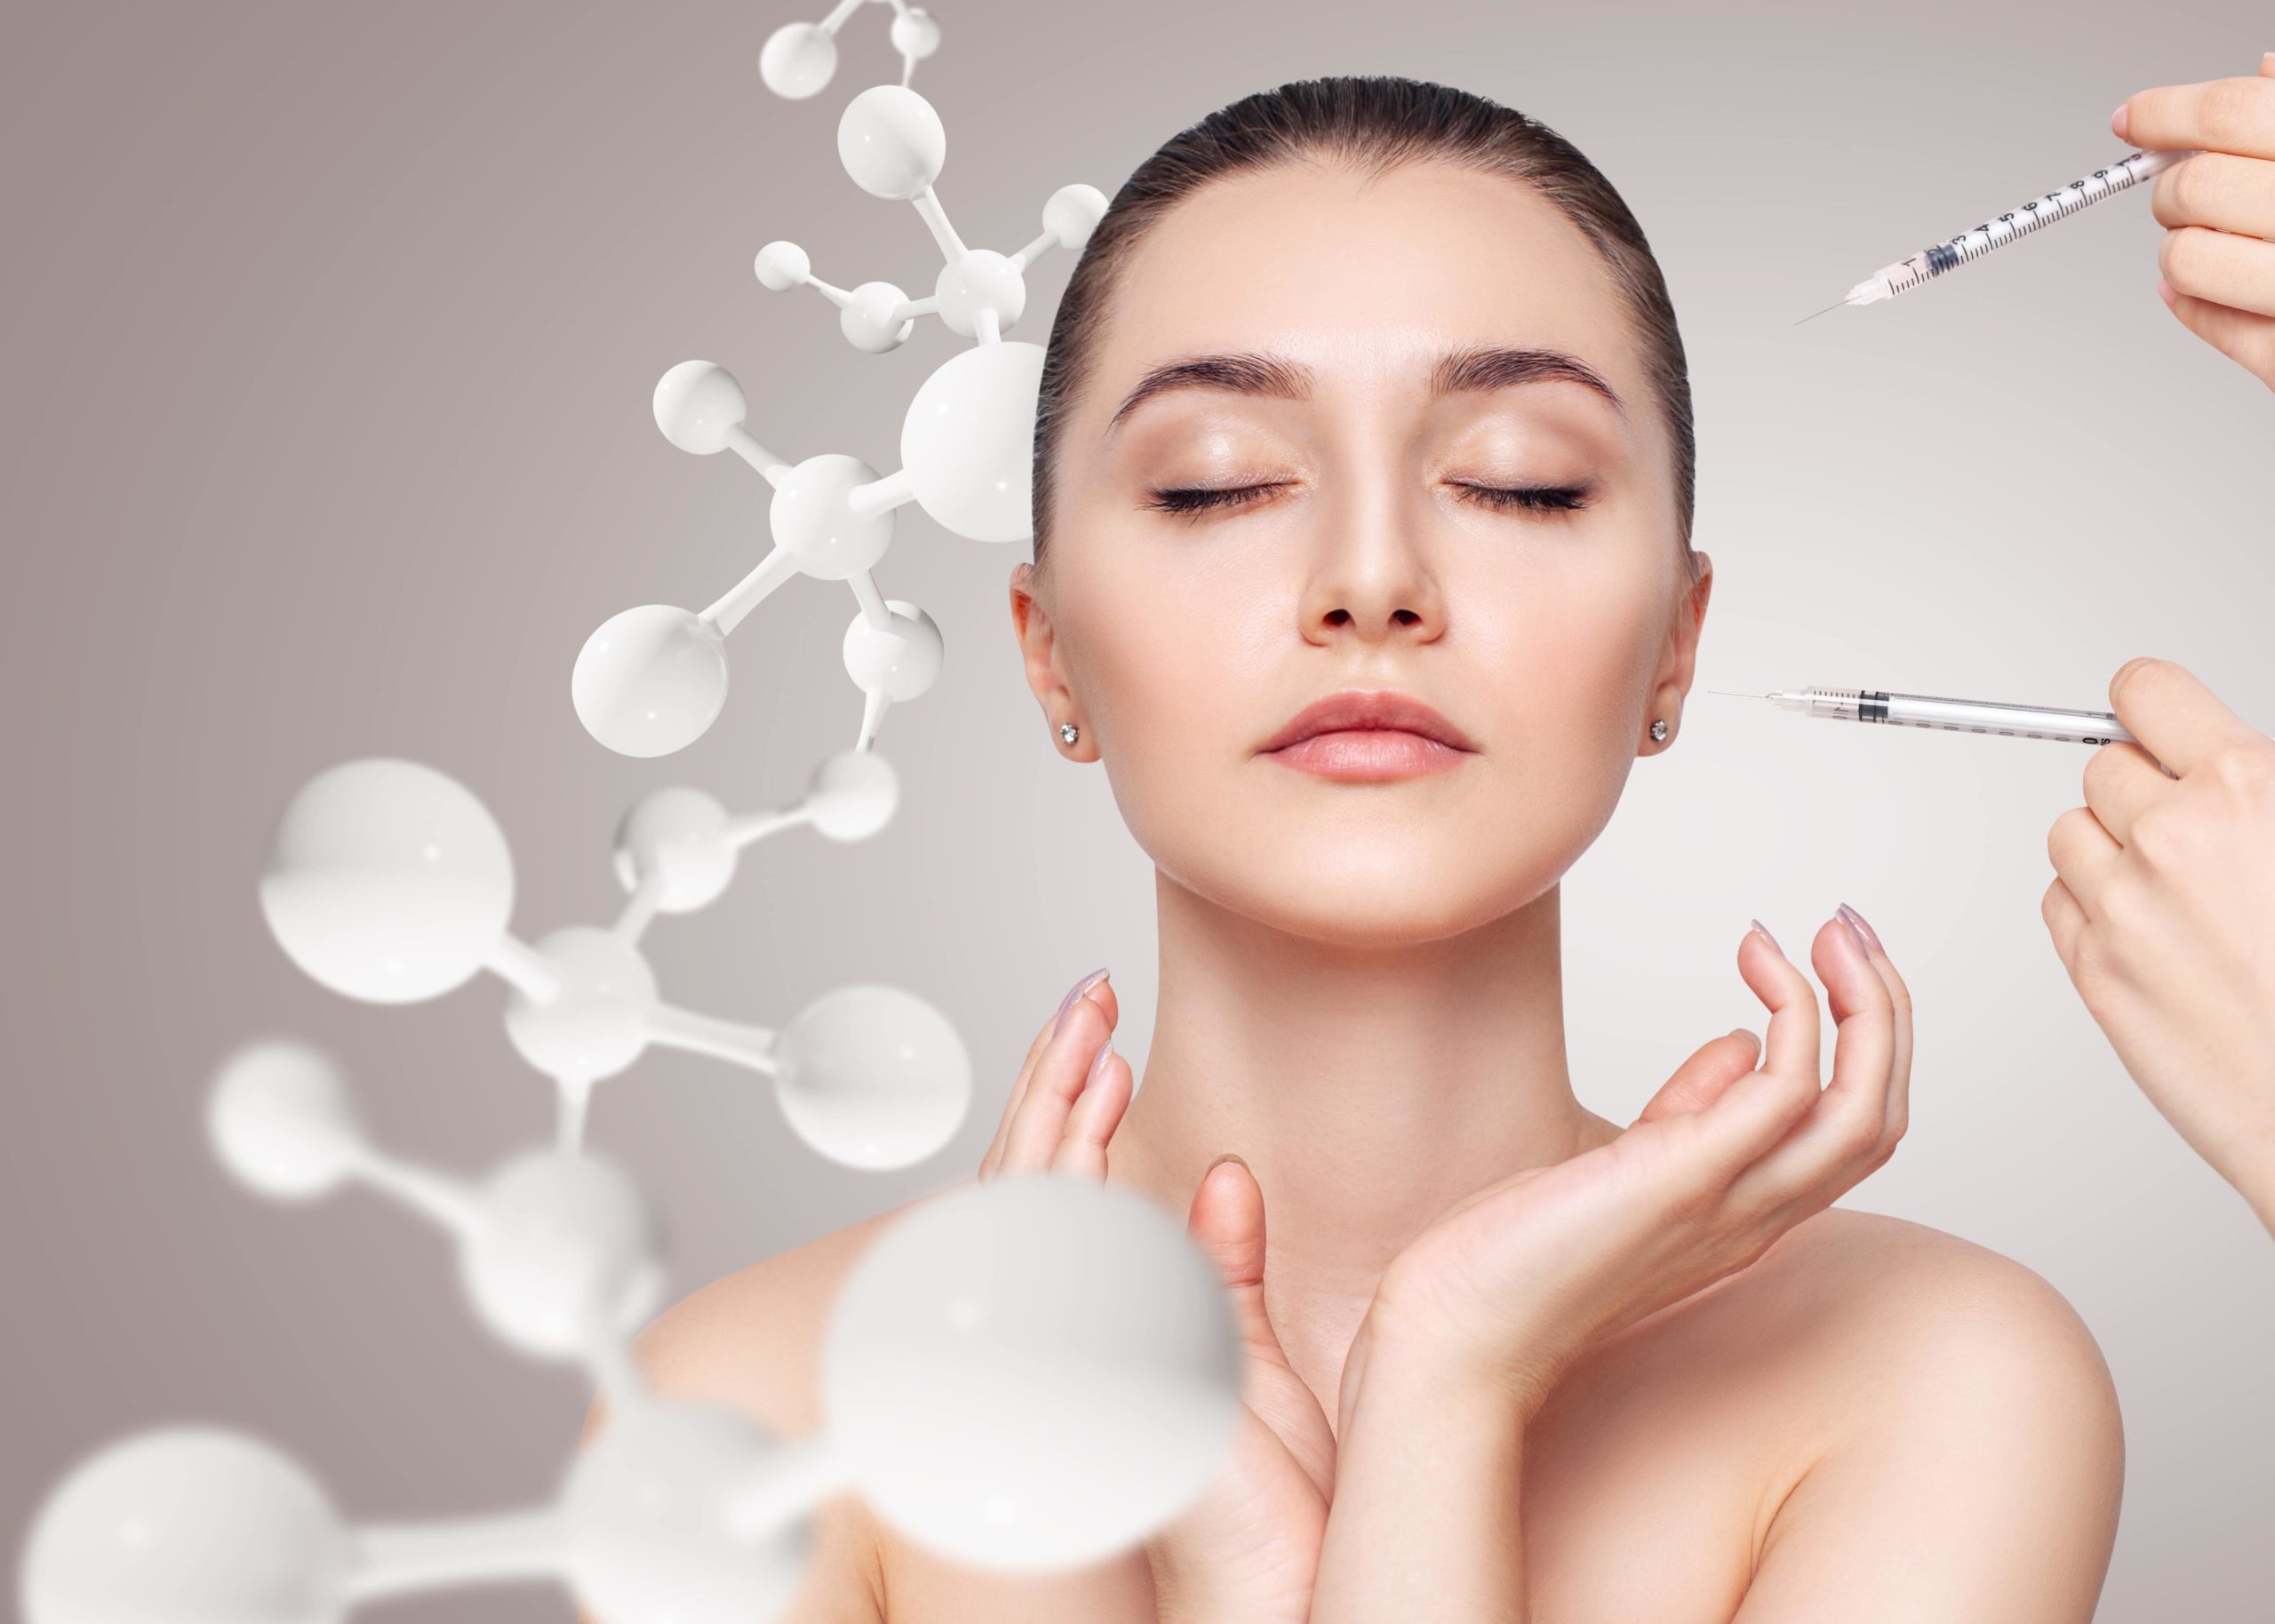 The Different Uses of Botox From Cosmetic to Medical Applications